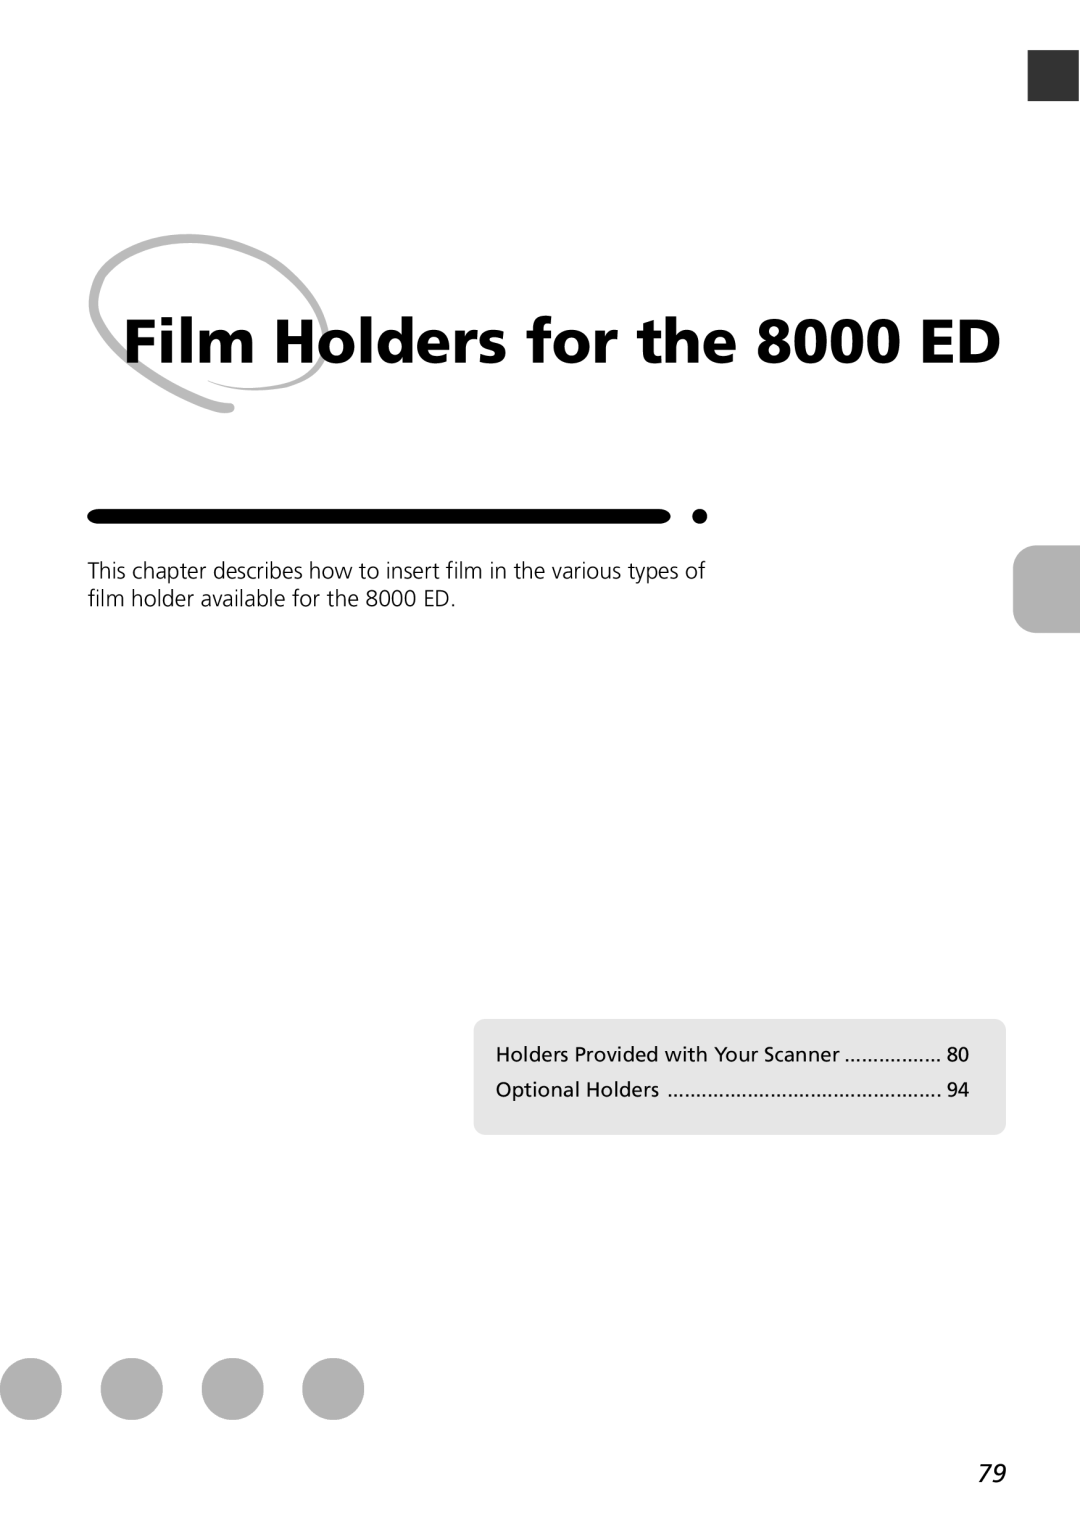 Nikon LS8000 user manual Film Holders for the 8000 ED, Holders Provided with Your Scanner, Optional Holders 